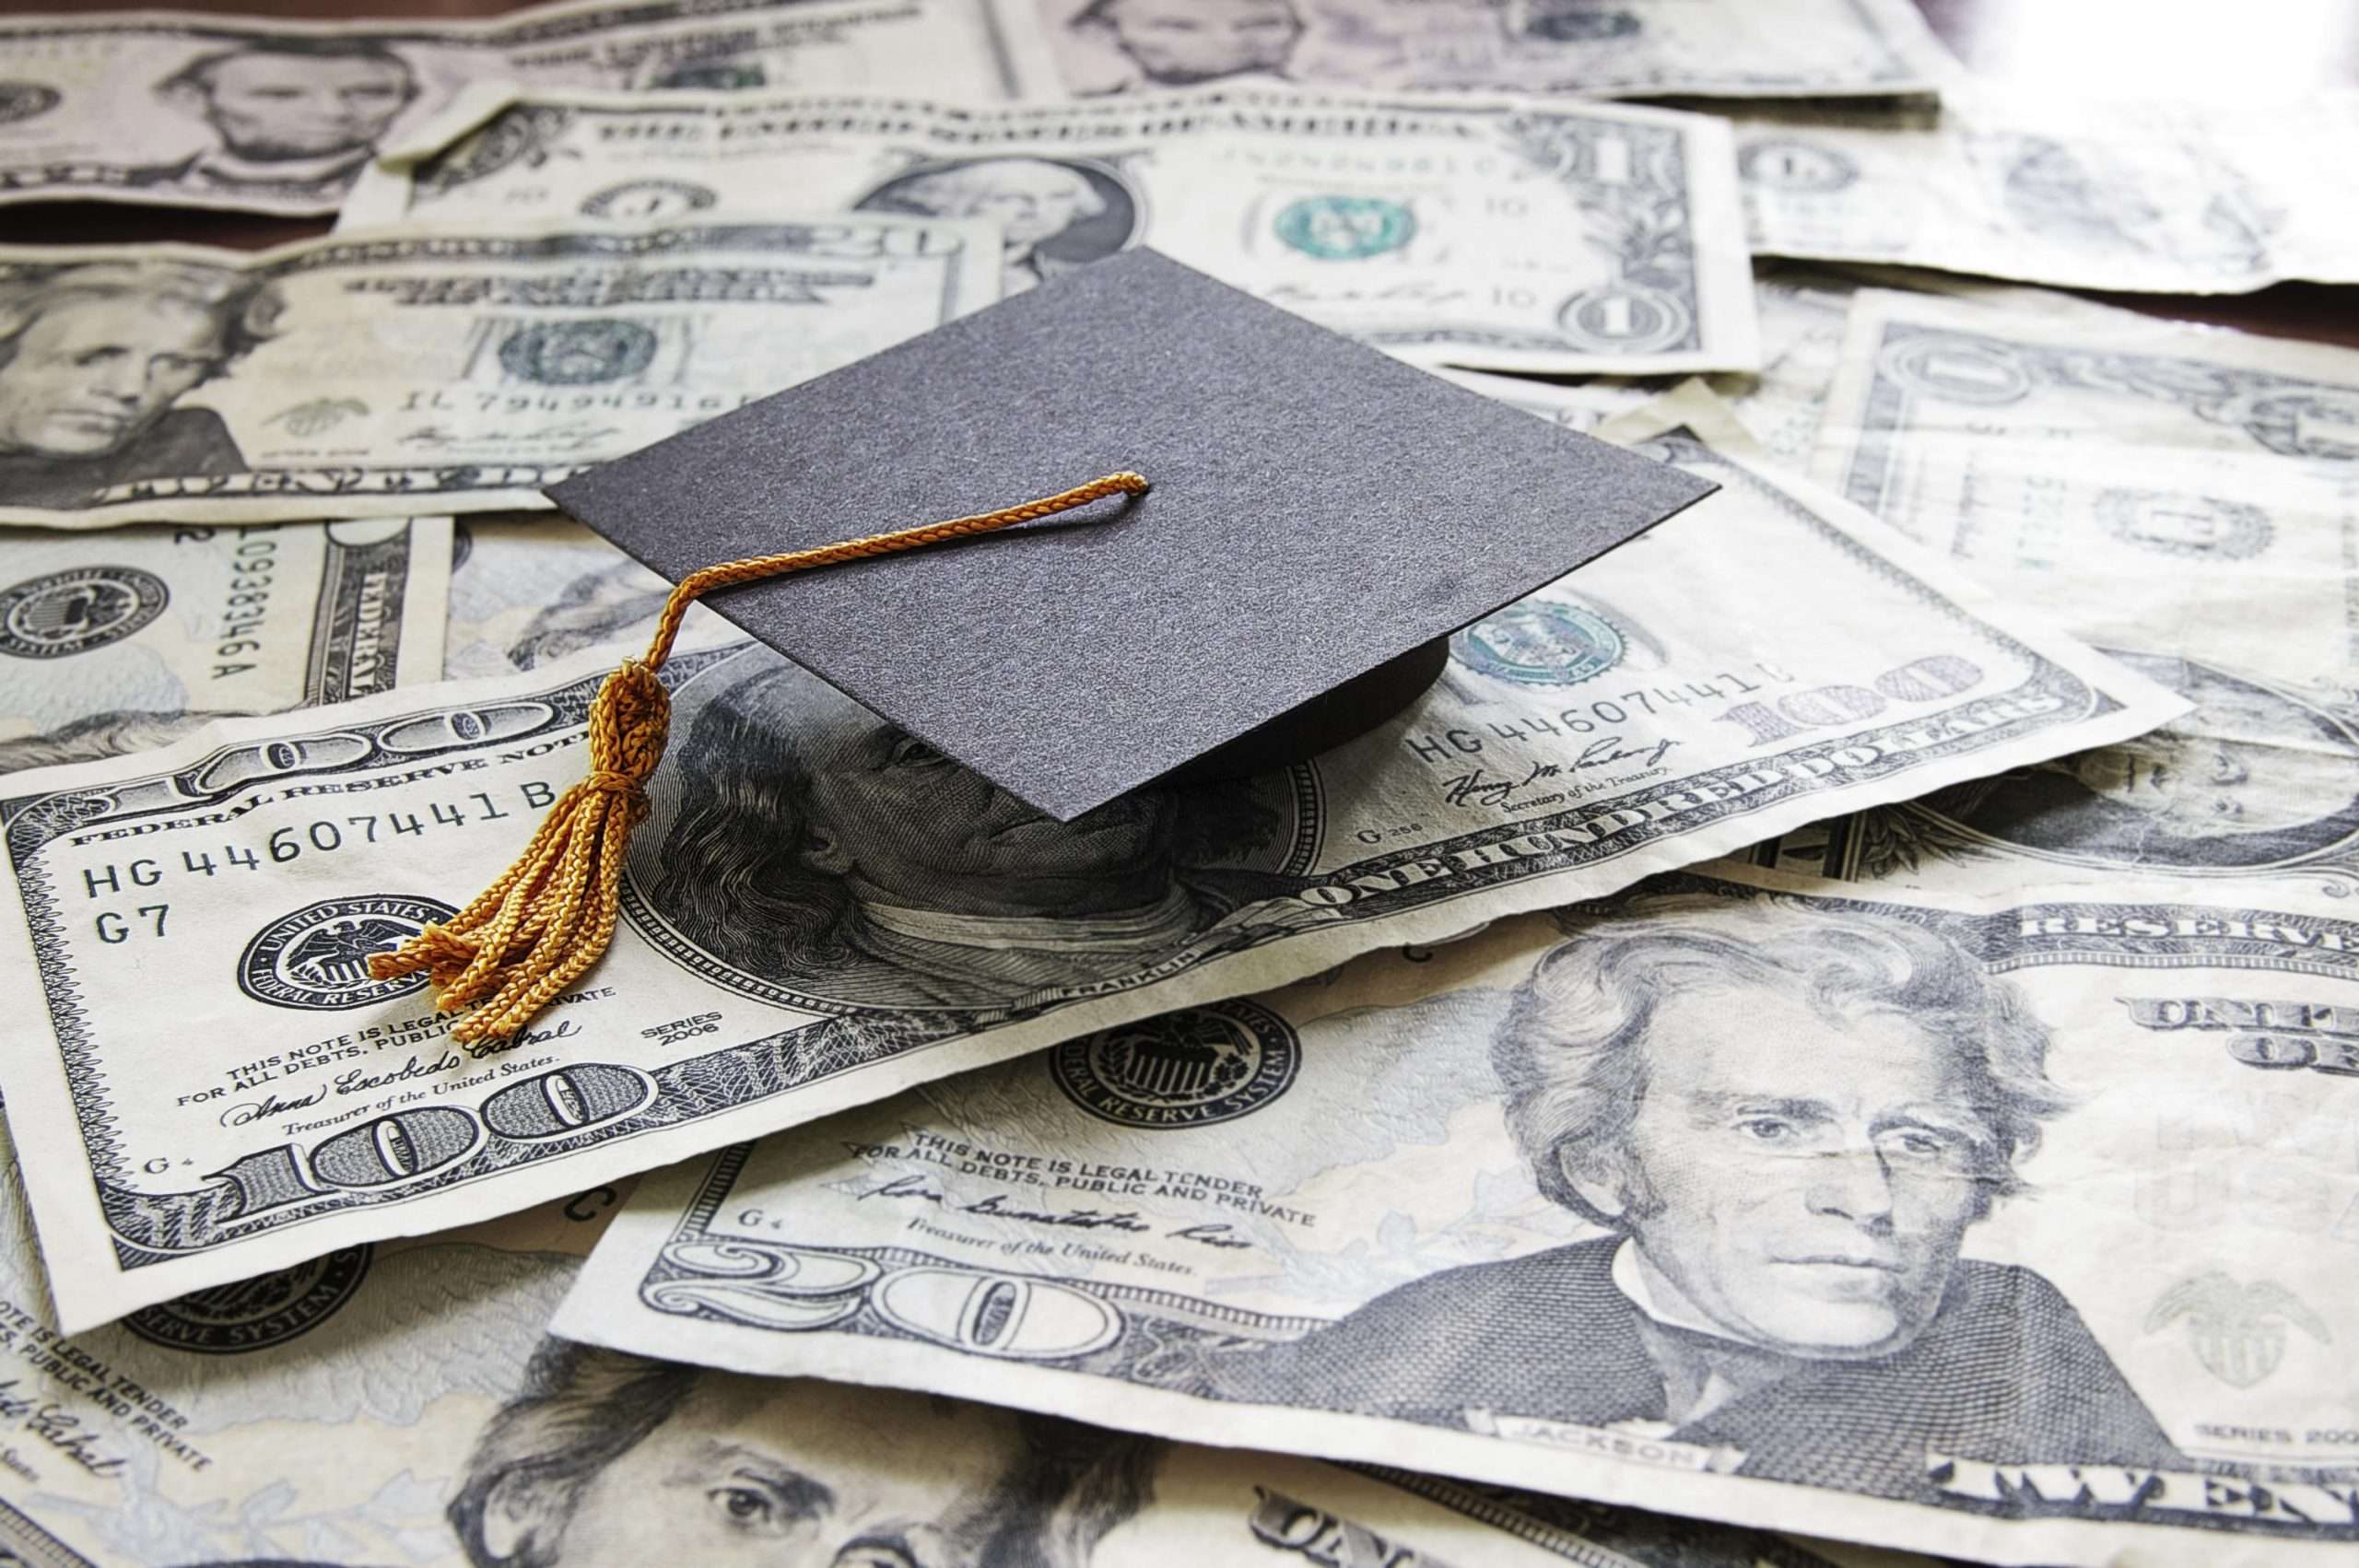 Now you can crowdfund a 529 college savings plan